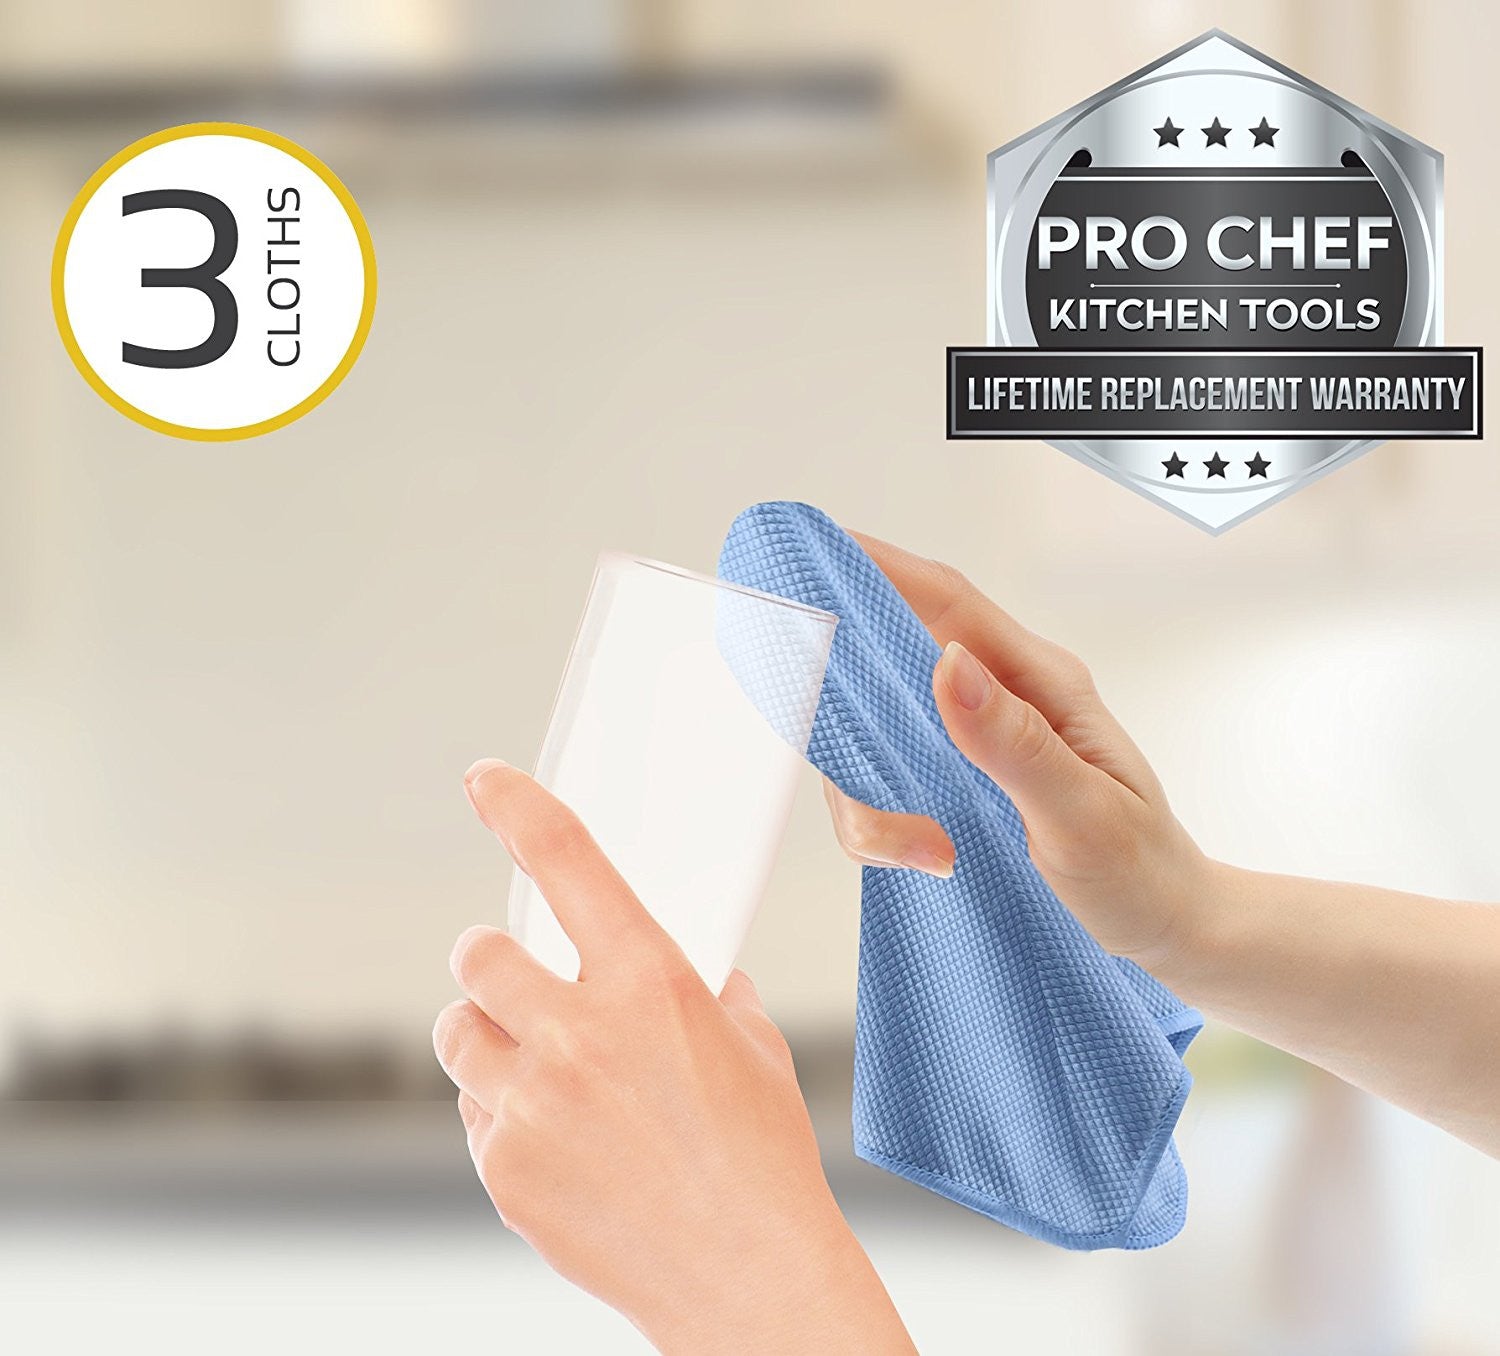 Microfiber Dish Cloths | Scrubs & Cleans: Dishes, Sinks, Counters, Stove  Tops | Easy Rinsing | Machine Washable | 6 Pack (Size 4 x 6 inches)